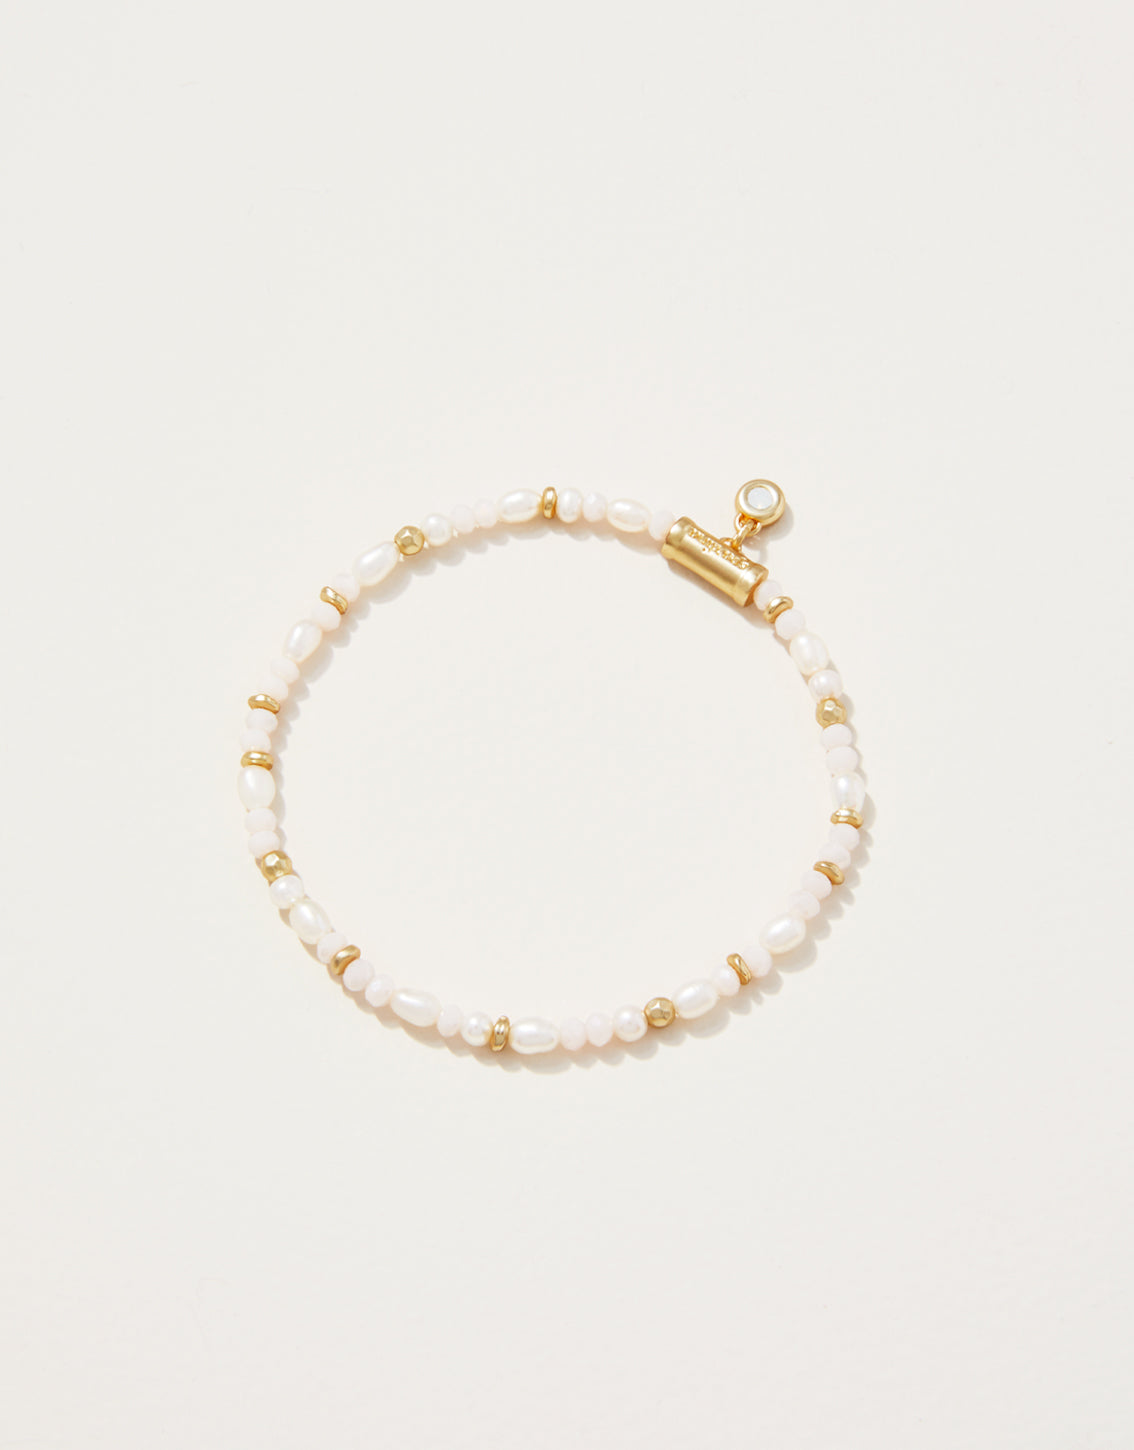 STRETCH BRACELET GOLD/PEARL - Molly's! A Chic and Unique Boutique 